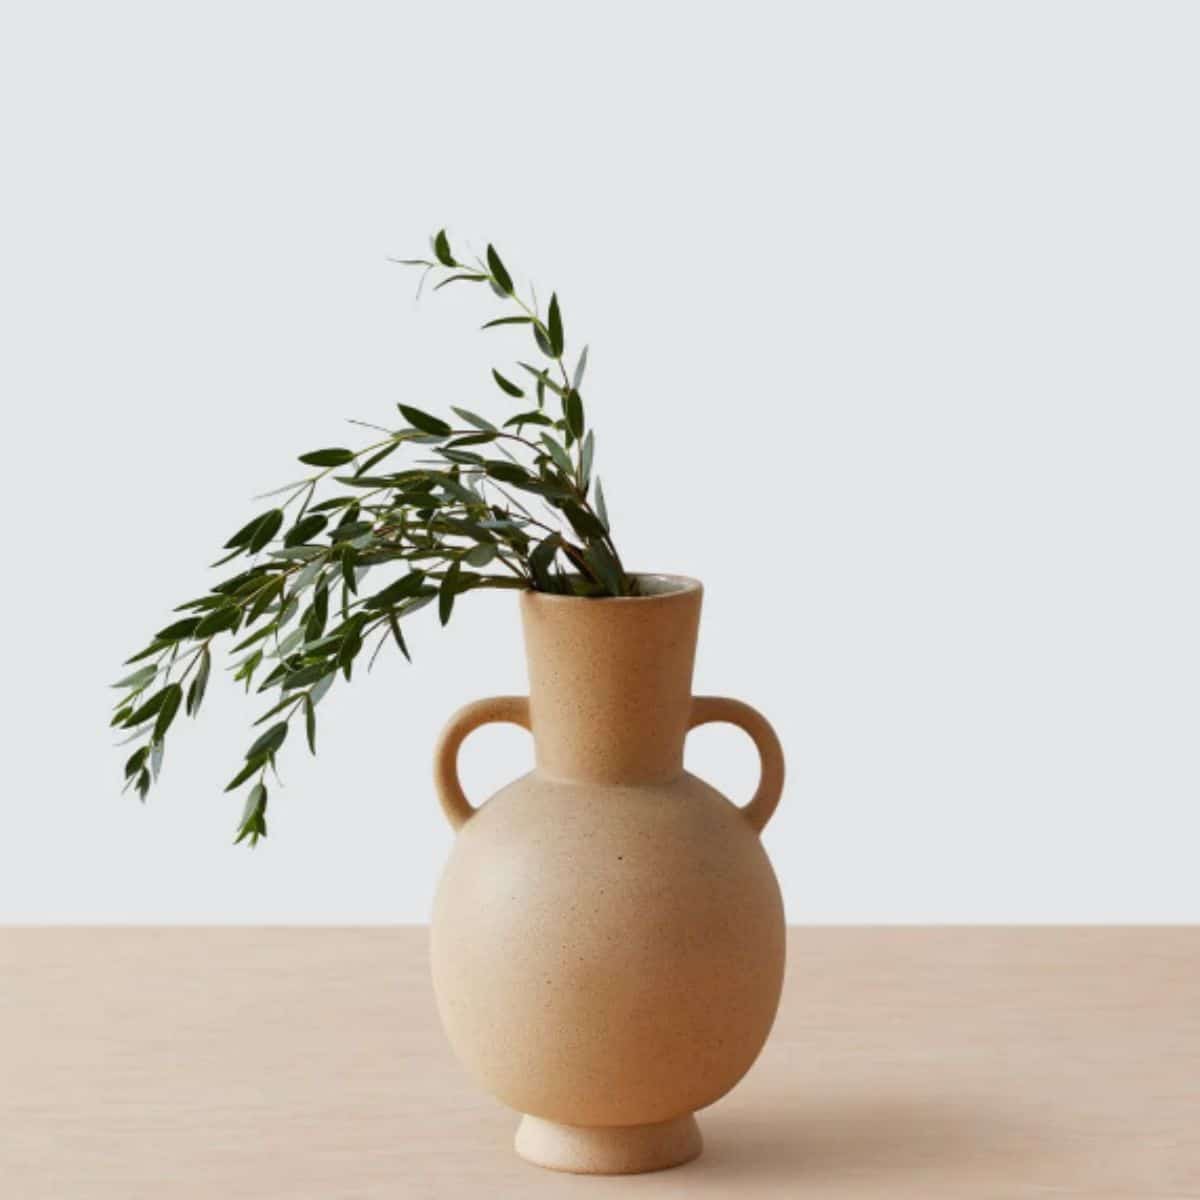 ceramic earthenware vase, light terracotta shade,  with handles and dried foliage placed inside from the citizenry